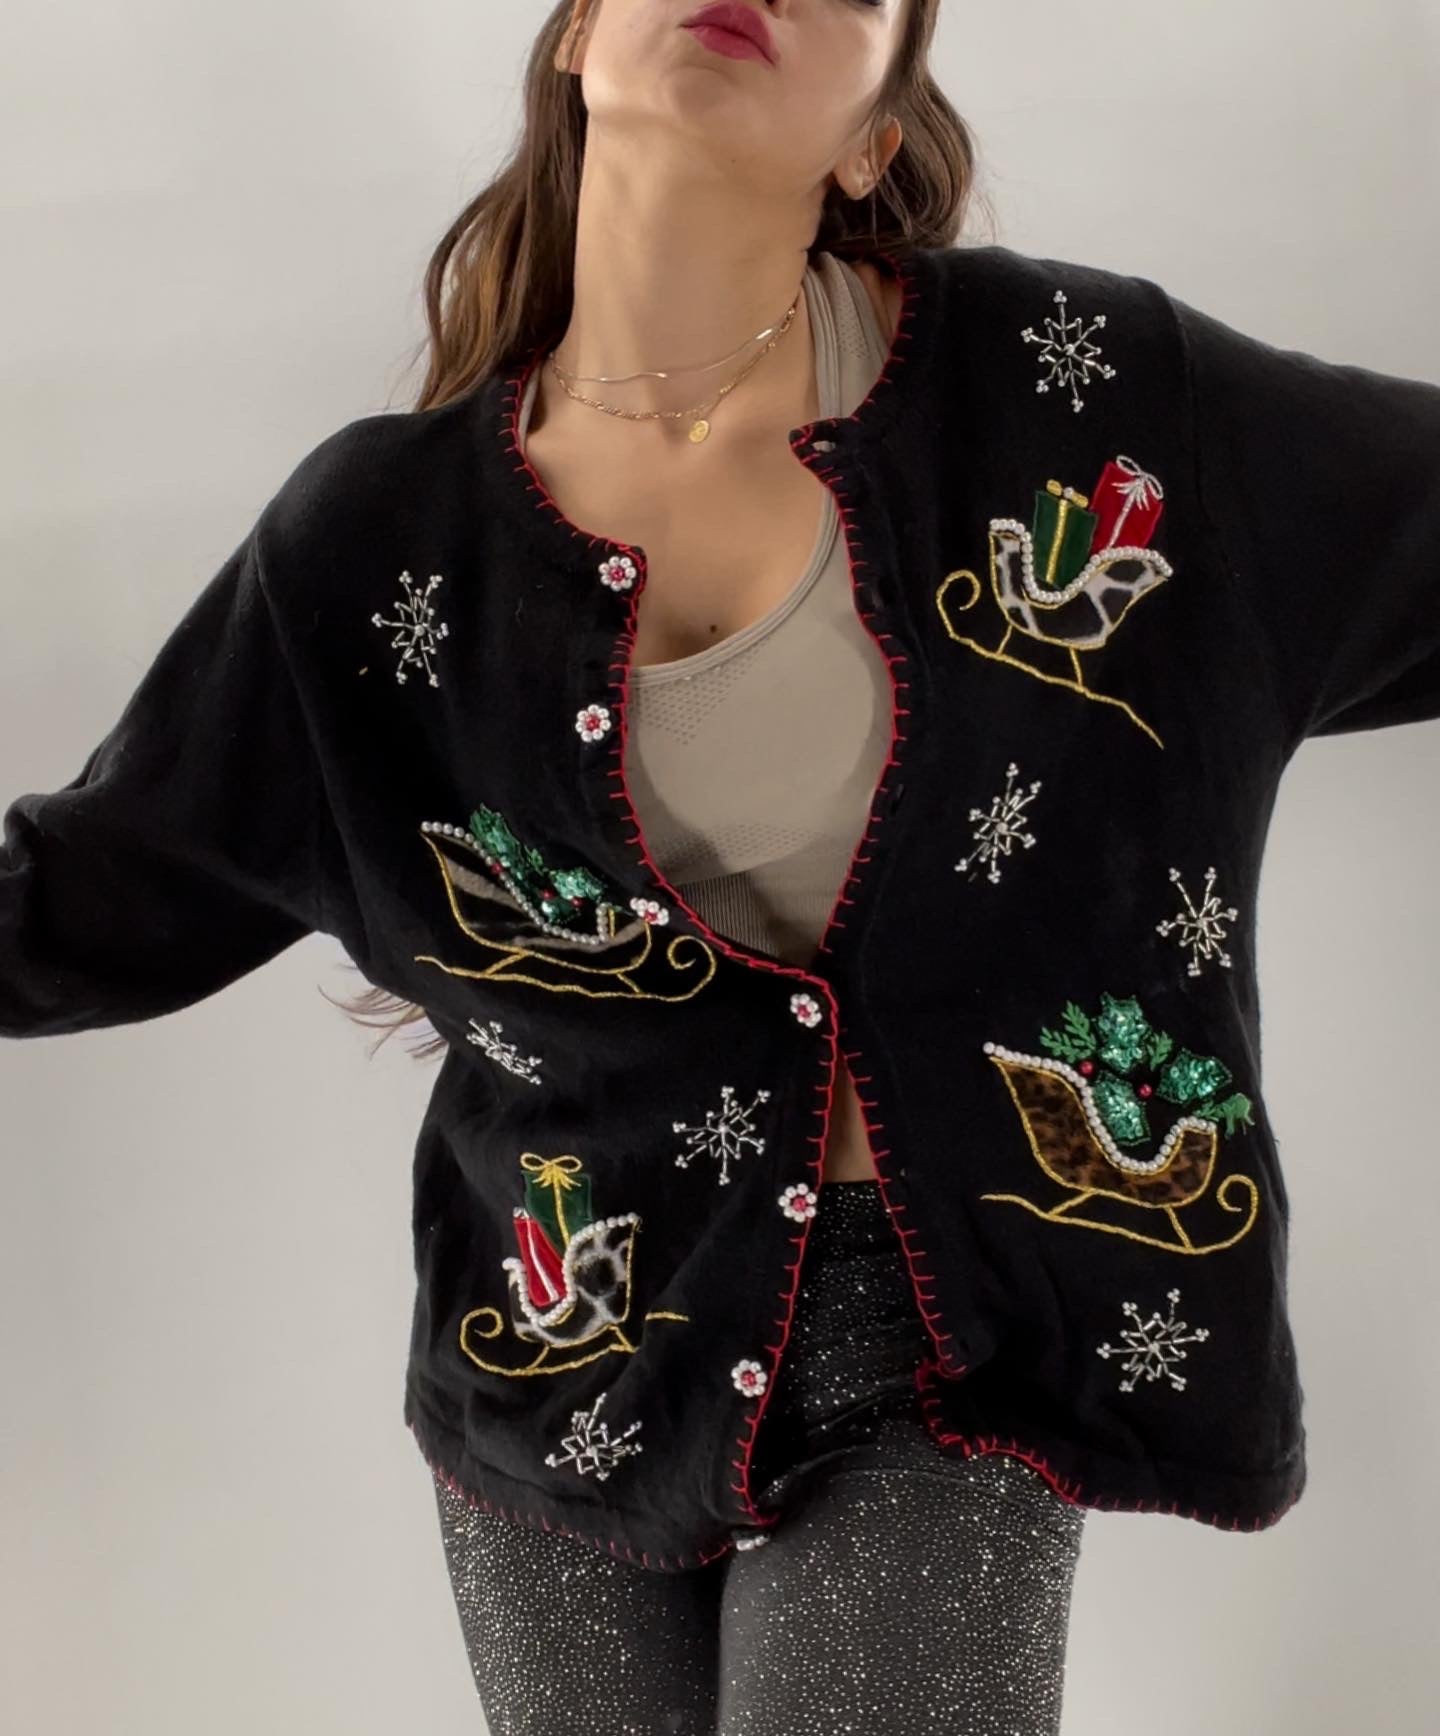 Urban Outfitters Wild Side Holiday Sweater (Medium)